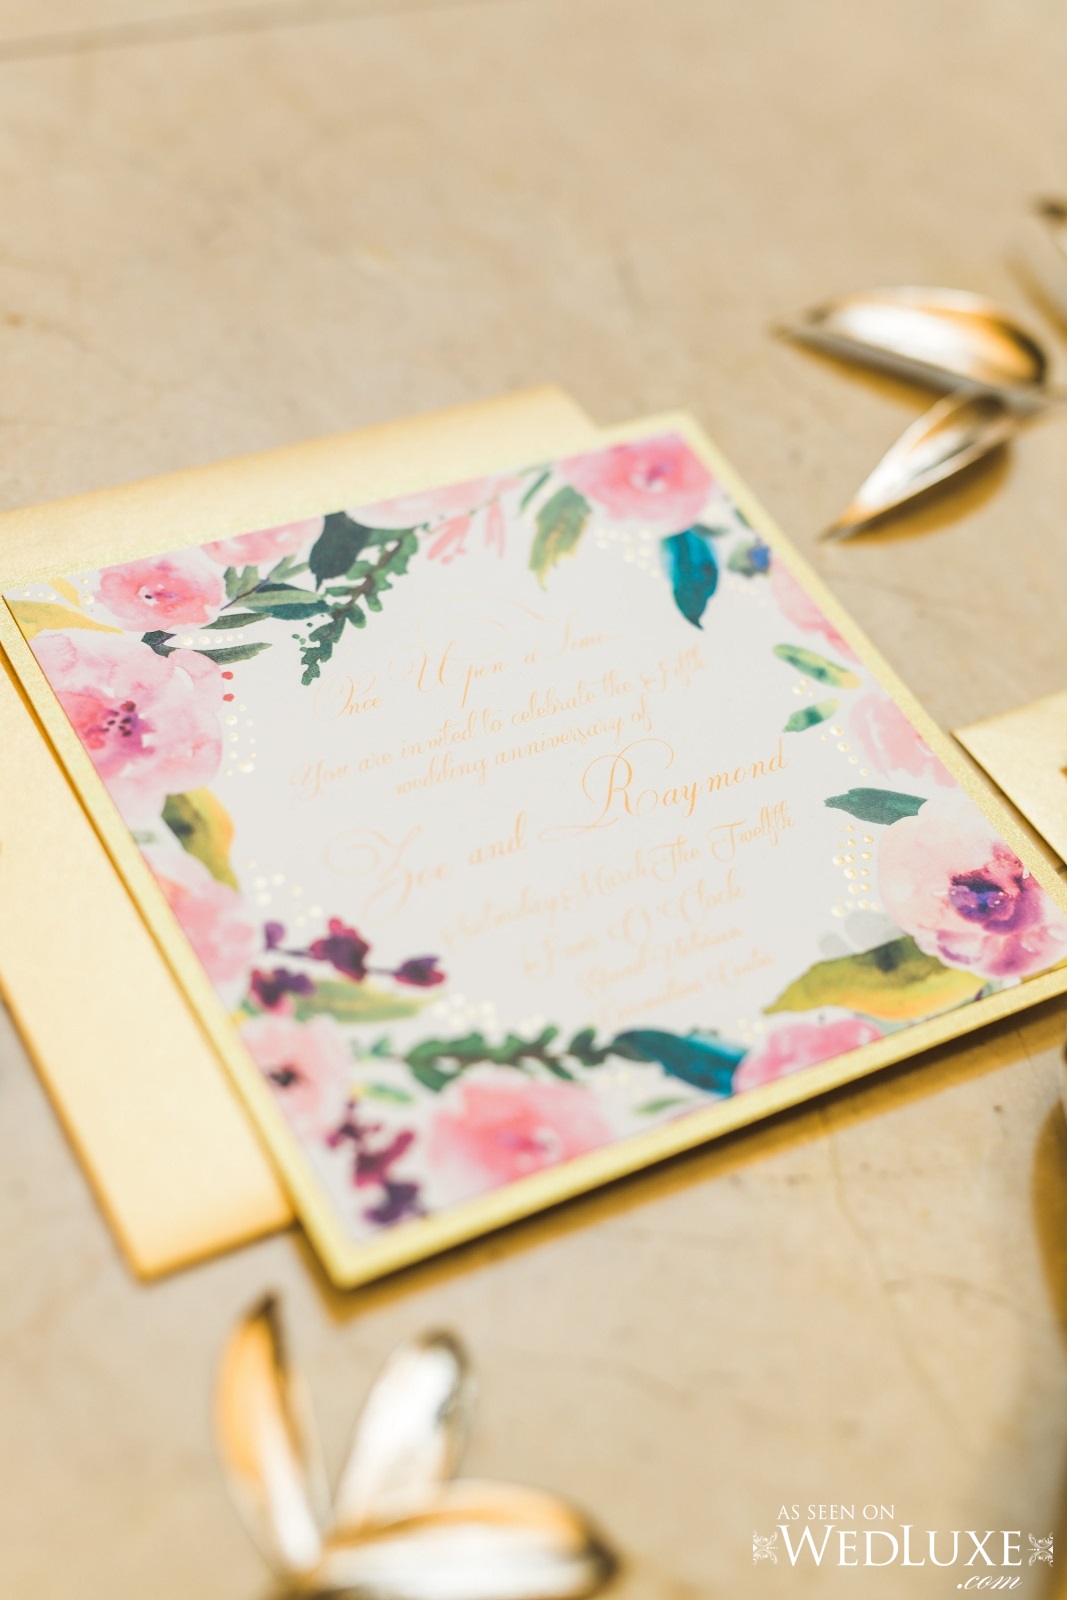 Detail shot of gold foliage and gold and floral themed wedding invitations. Cinderella themed style shoot located at the Victorian Convention centre, Missisauga.